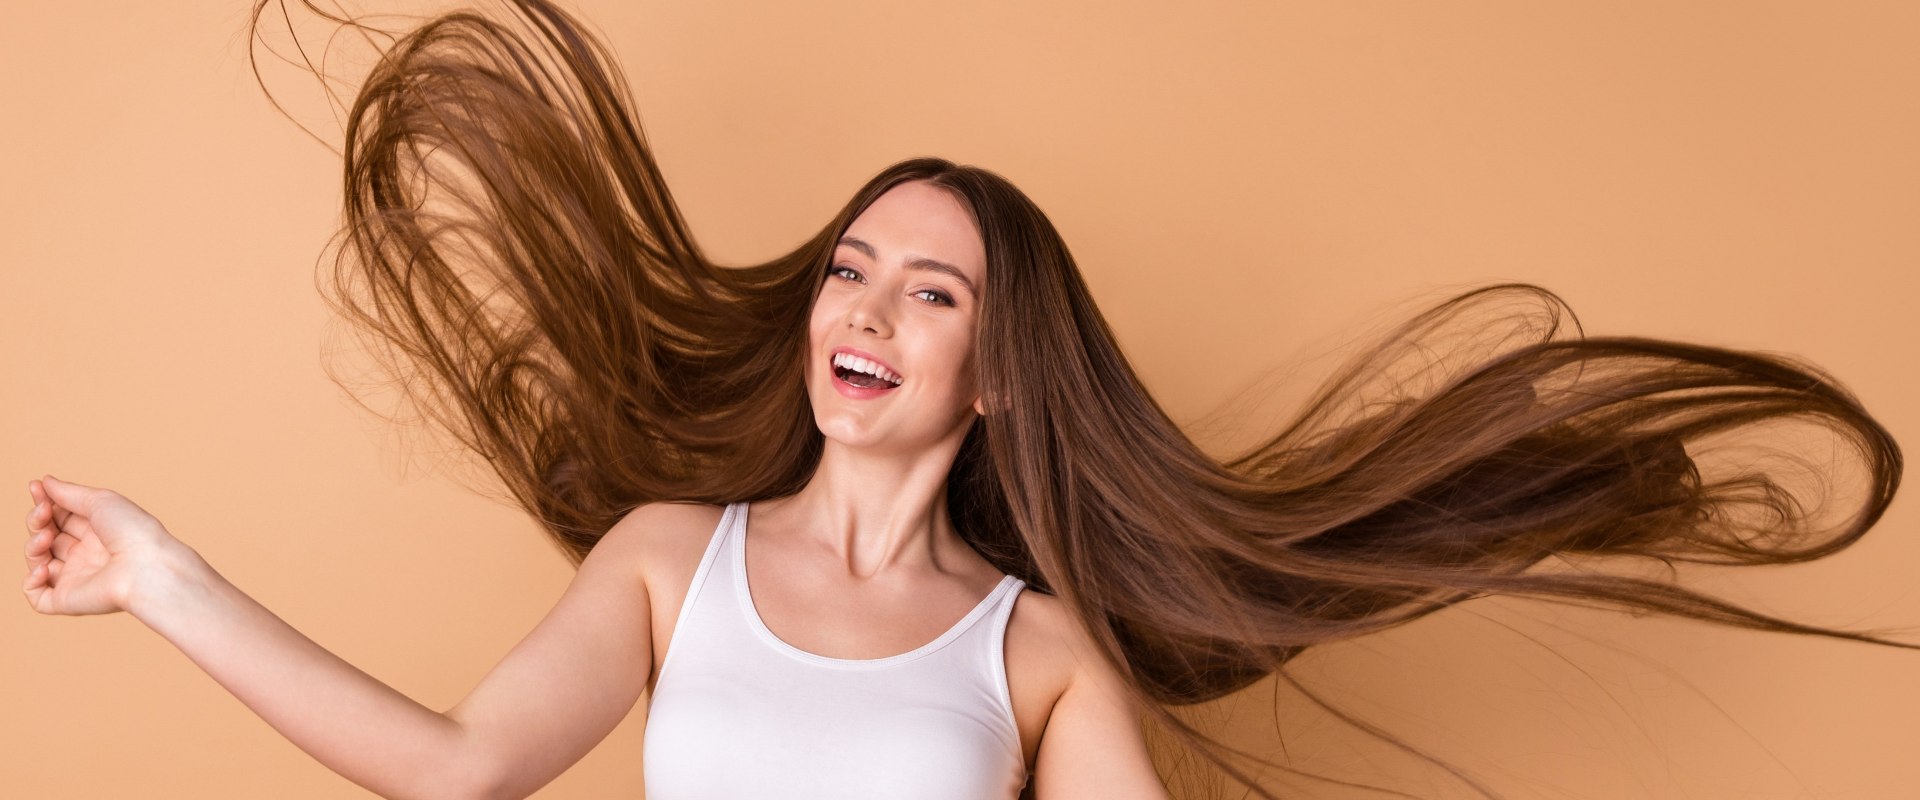 Does hair care fall under beauty?